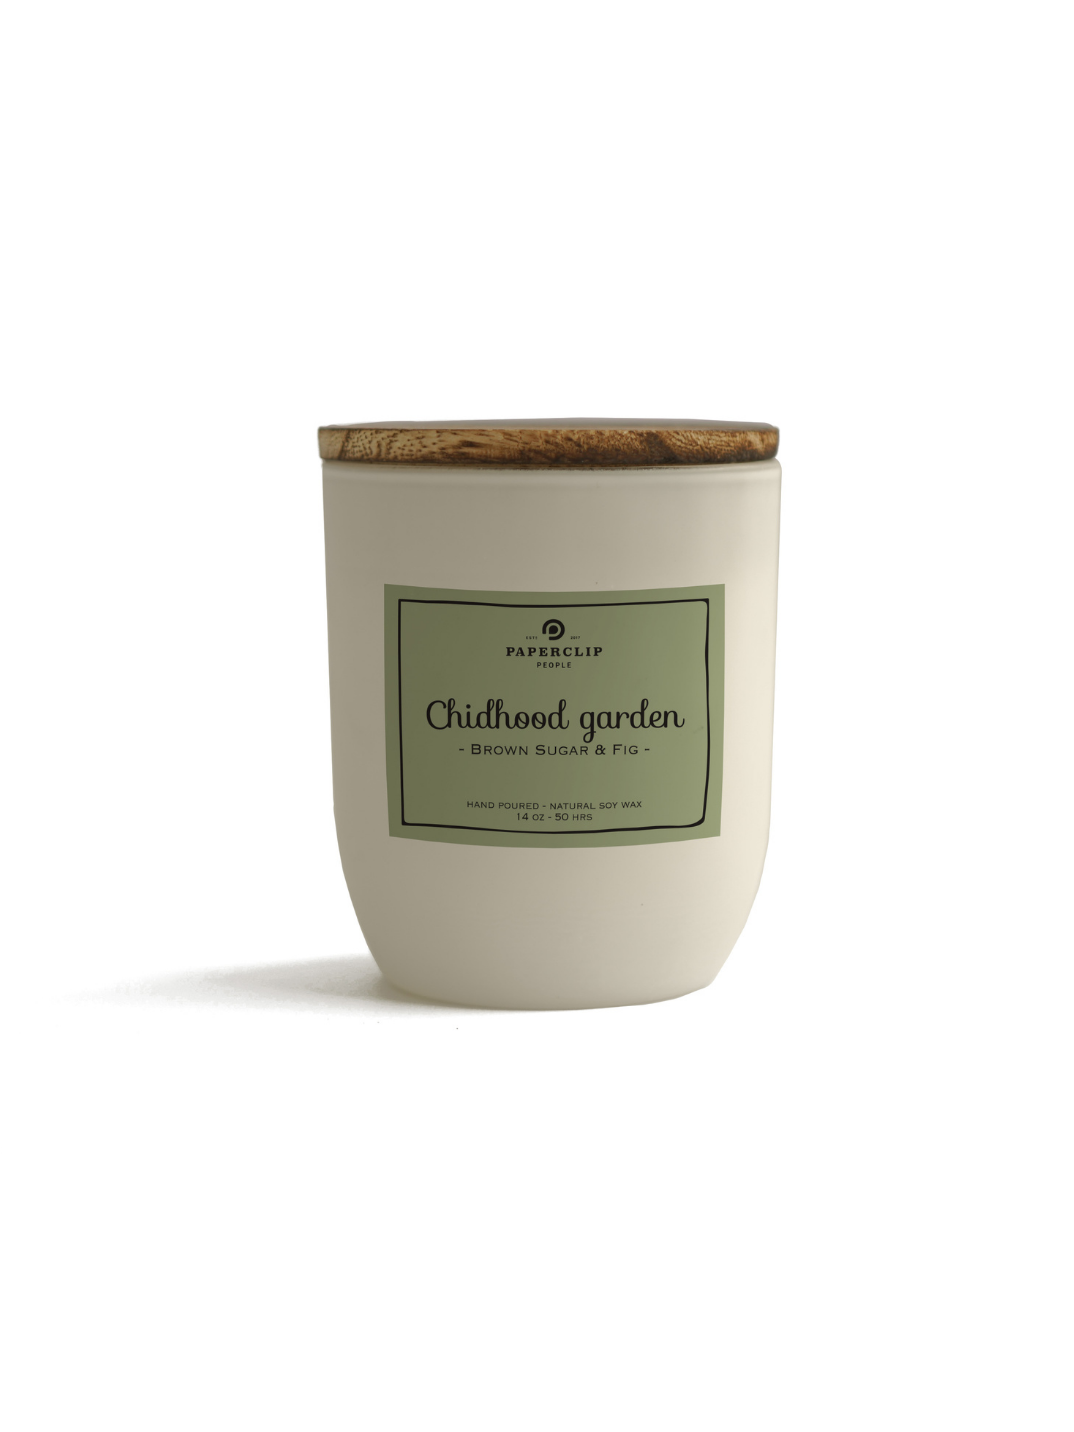 childhood garden candle made in Indonesia sustainable recycled packaging hand-poured in Indonesia